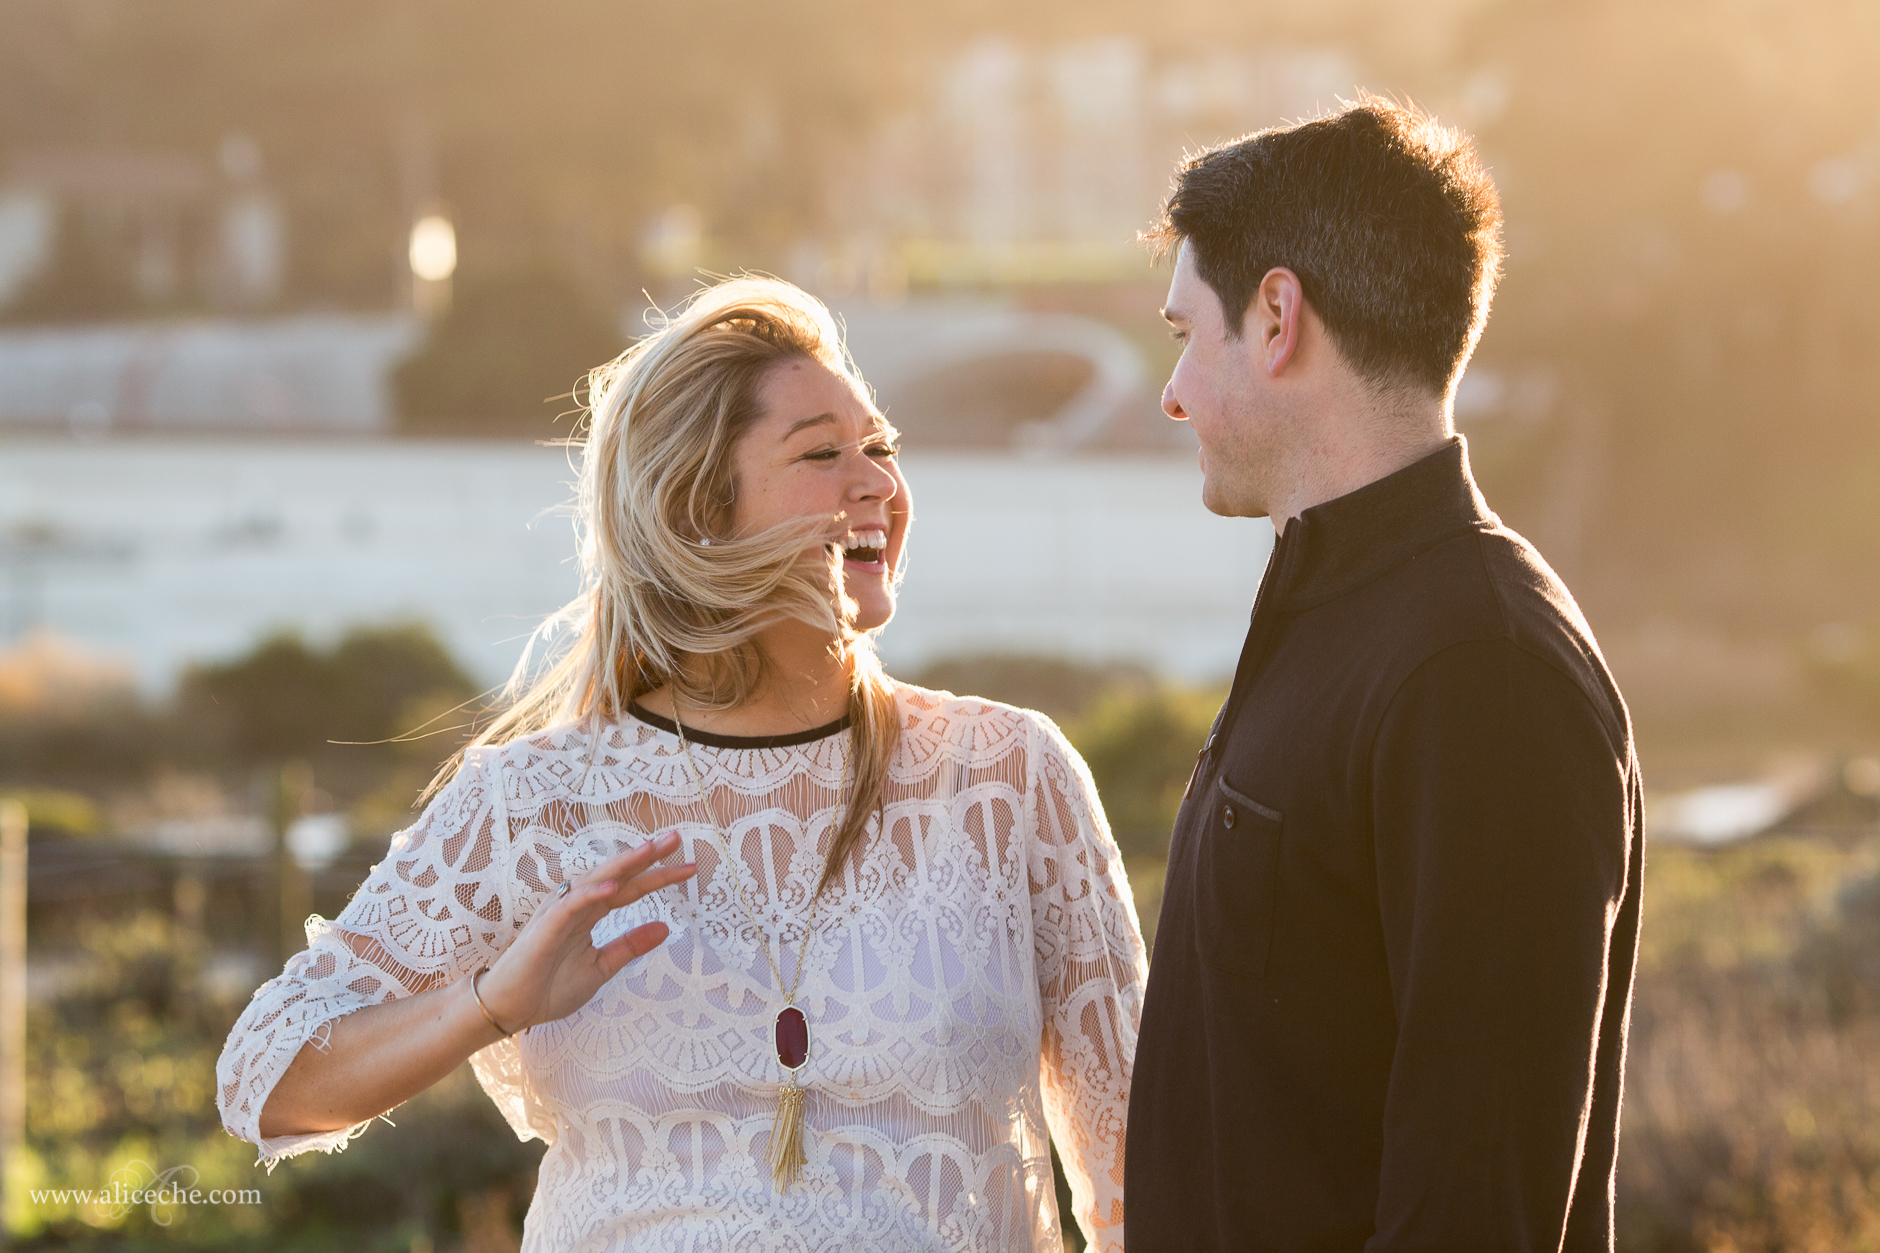 alice-che-photography-san-francisco-engagement-shoot-crissy-field-laughing-girl-wind-in-hair